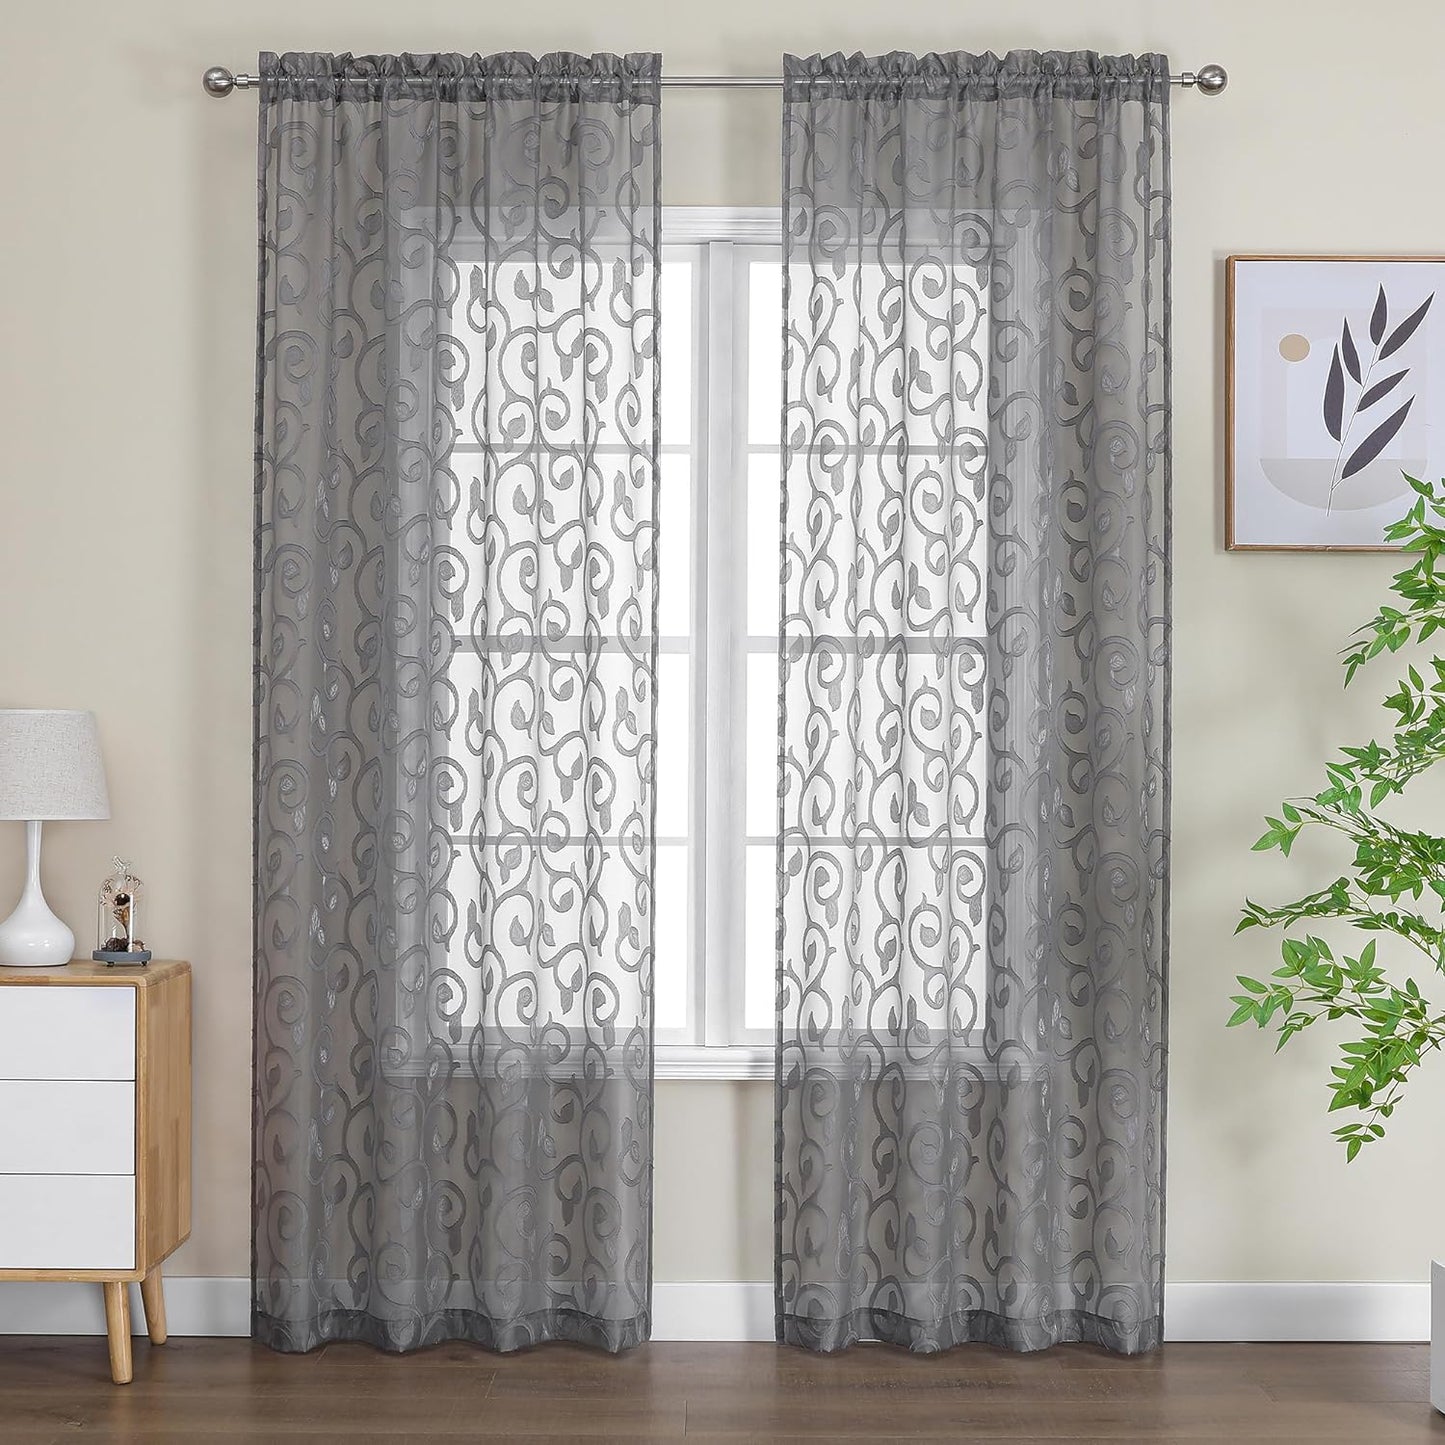 OWENIE Furman Sheer Curtains 84 Inches Long for Bedroom Living Room 2 Panels Set, Light Filtering Window Curtains, Semi Transparent Voile Top Dual Rod Pocket, Grey, 40Wx84L Inch, Total 84 Inches Width  OWENIE Charcoal Gray 40W X 96L 